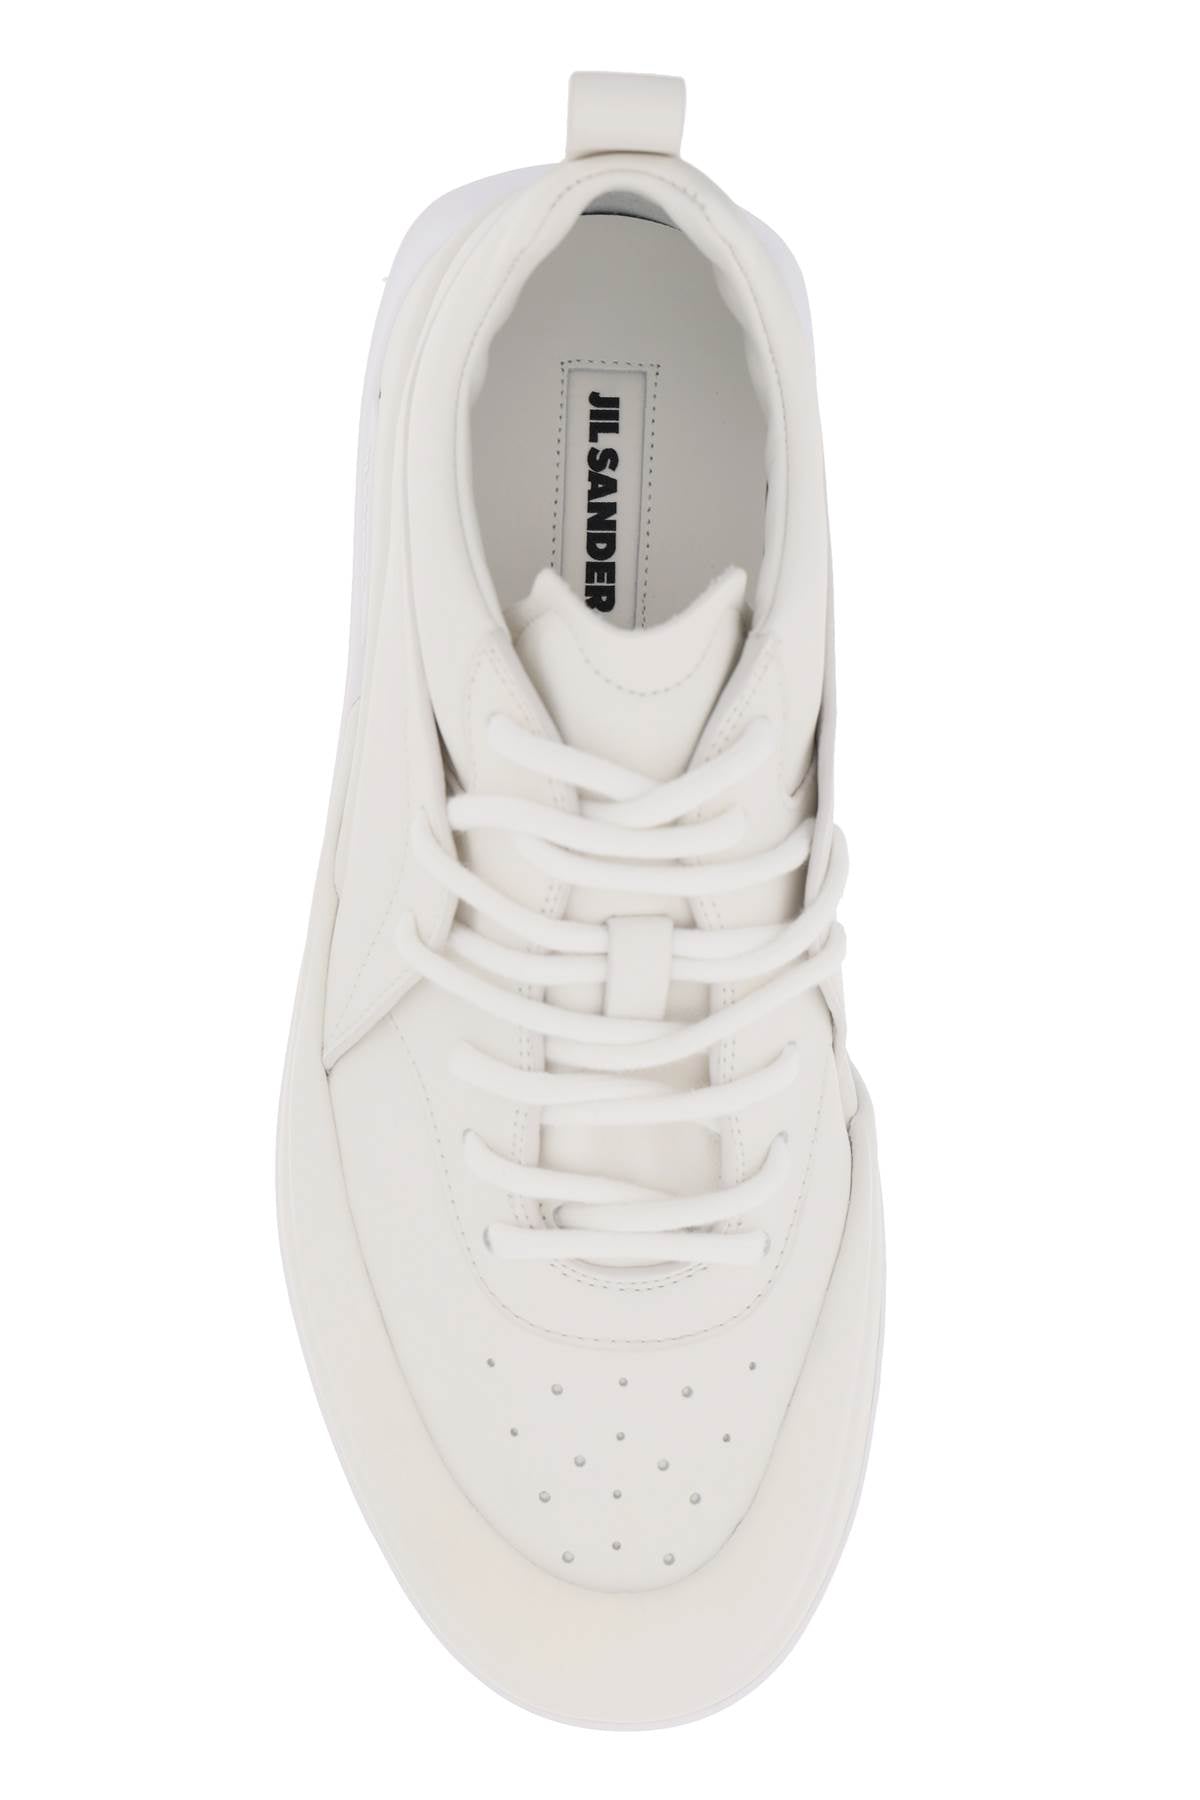 Shop Jil Sander Men's White Leather Sneakers For Ss24 Collection